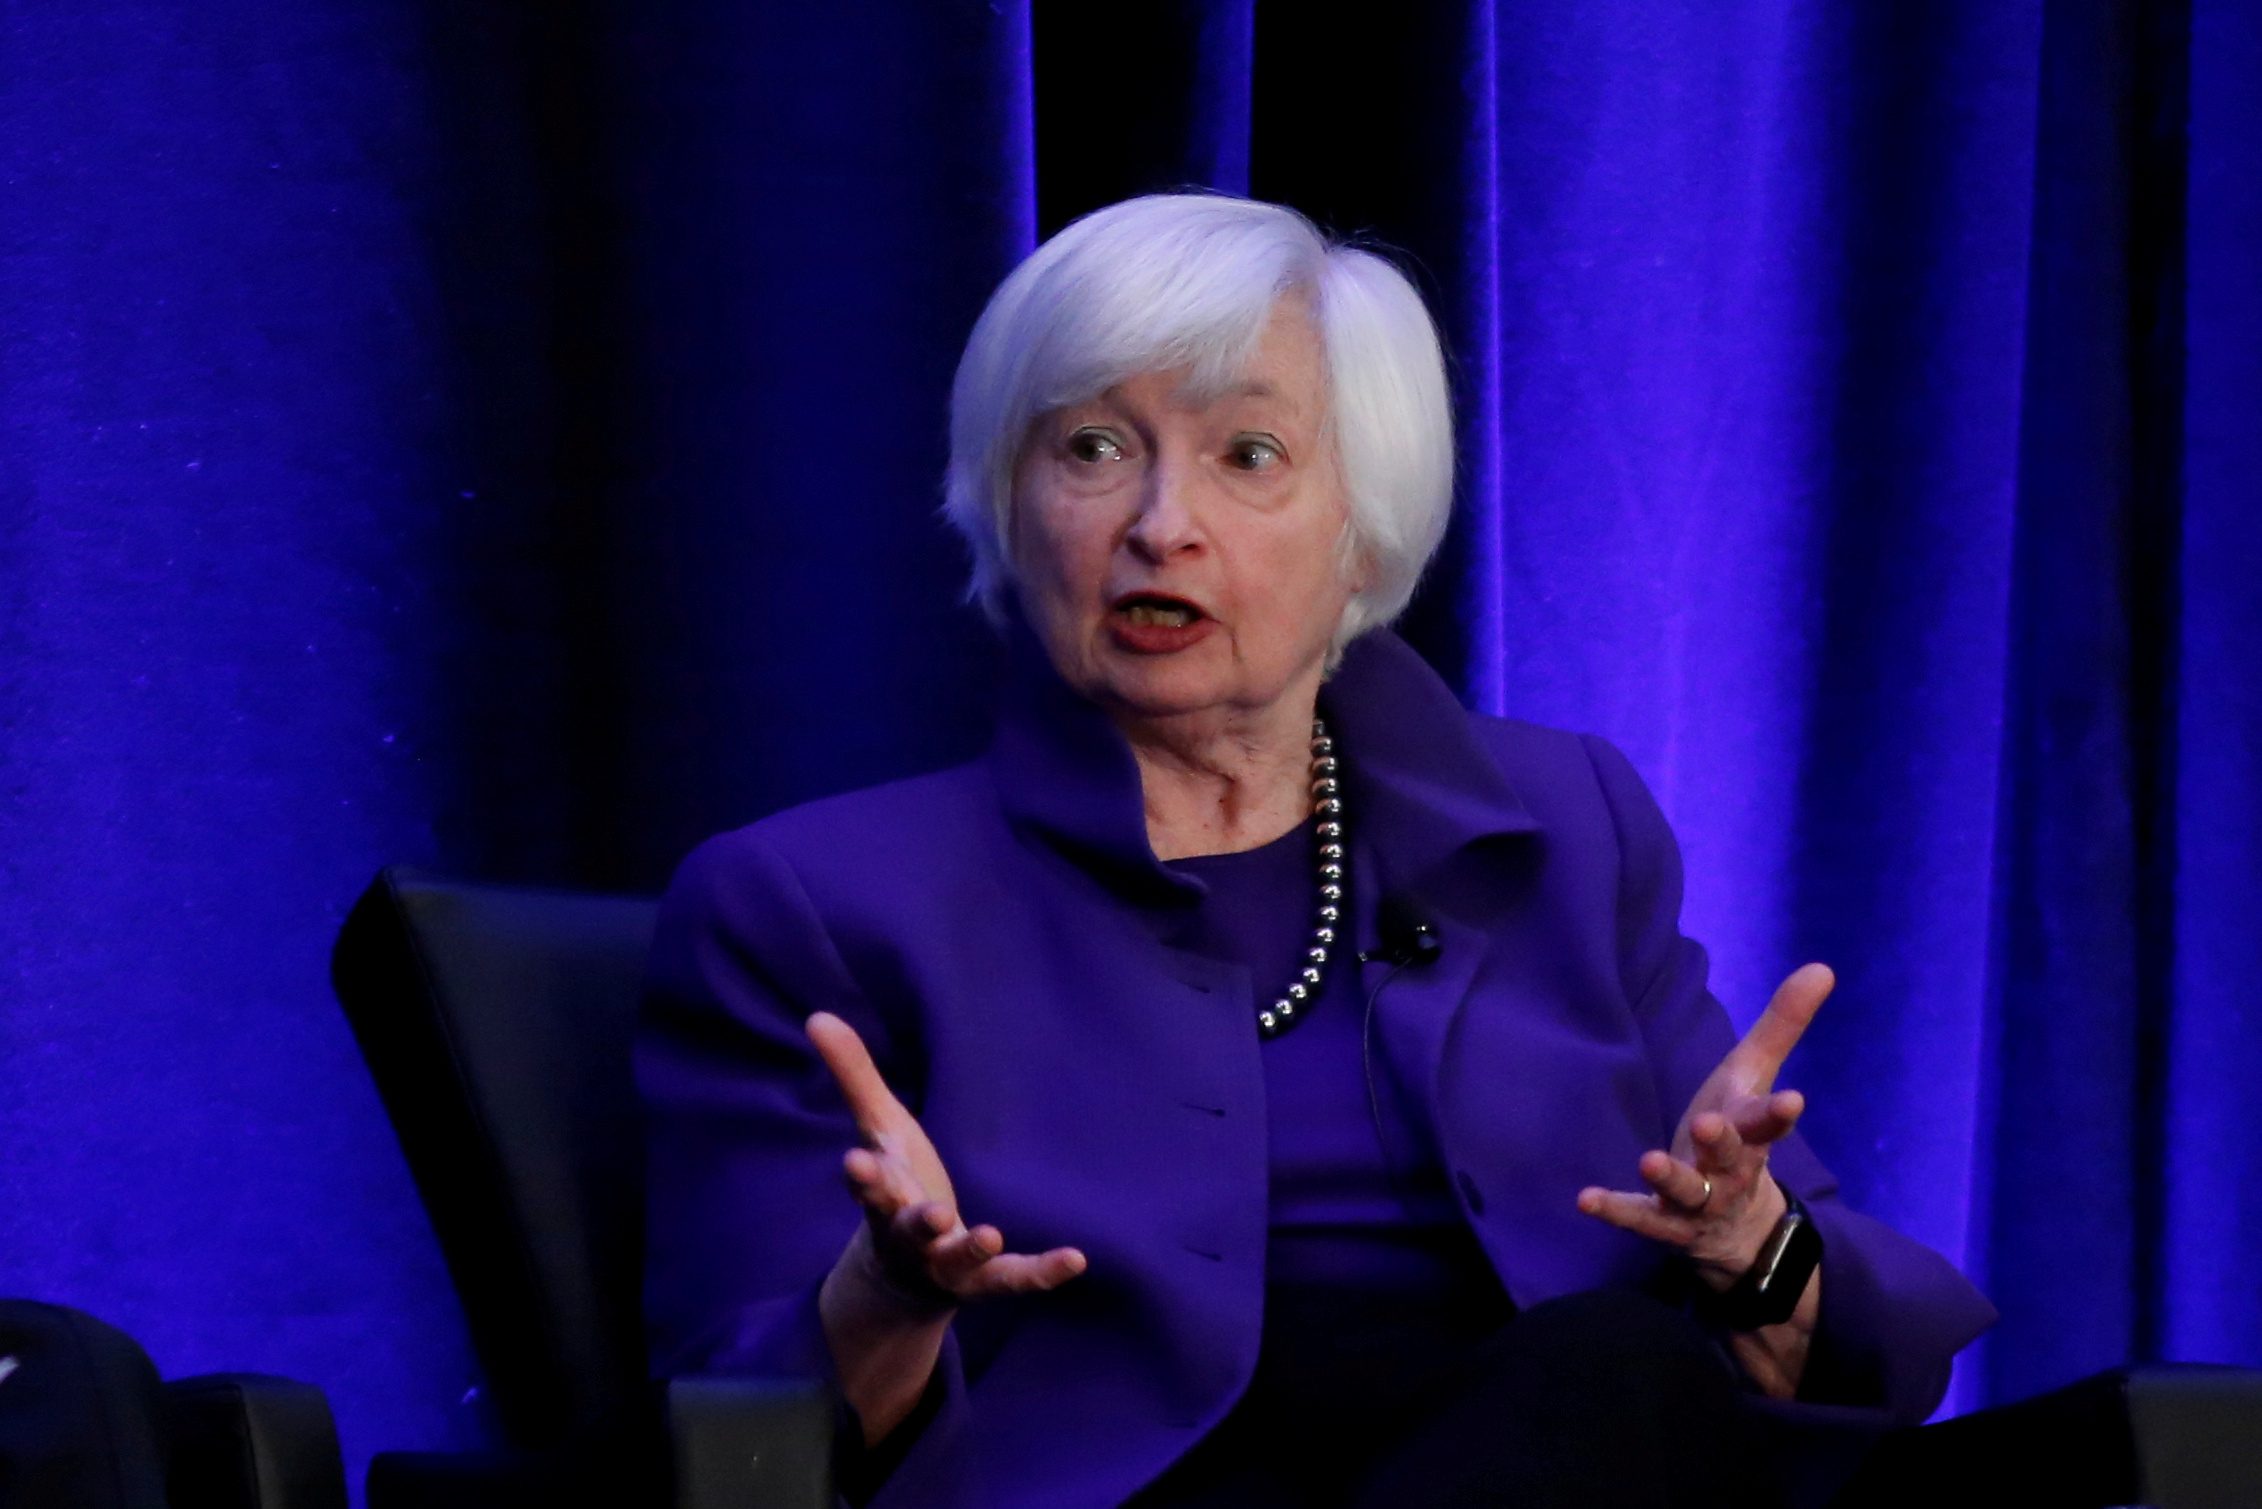 Yellen’s call to ‘act big’ reflects long rethink on big government debt